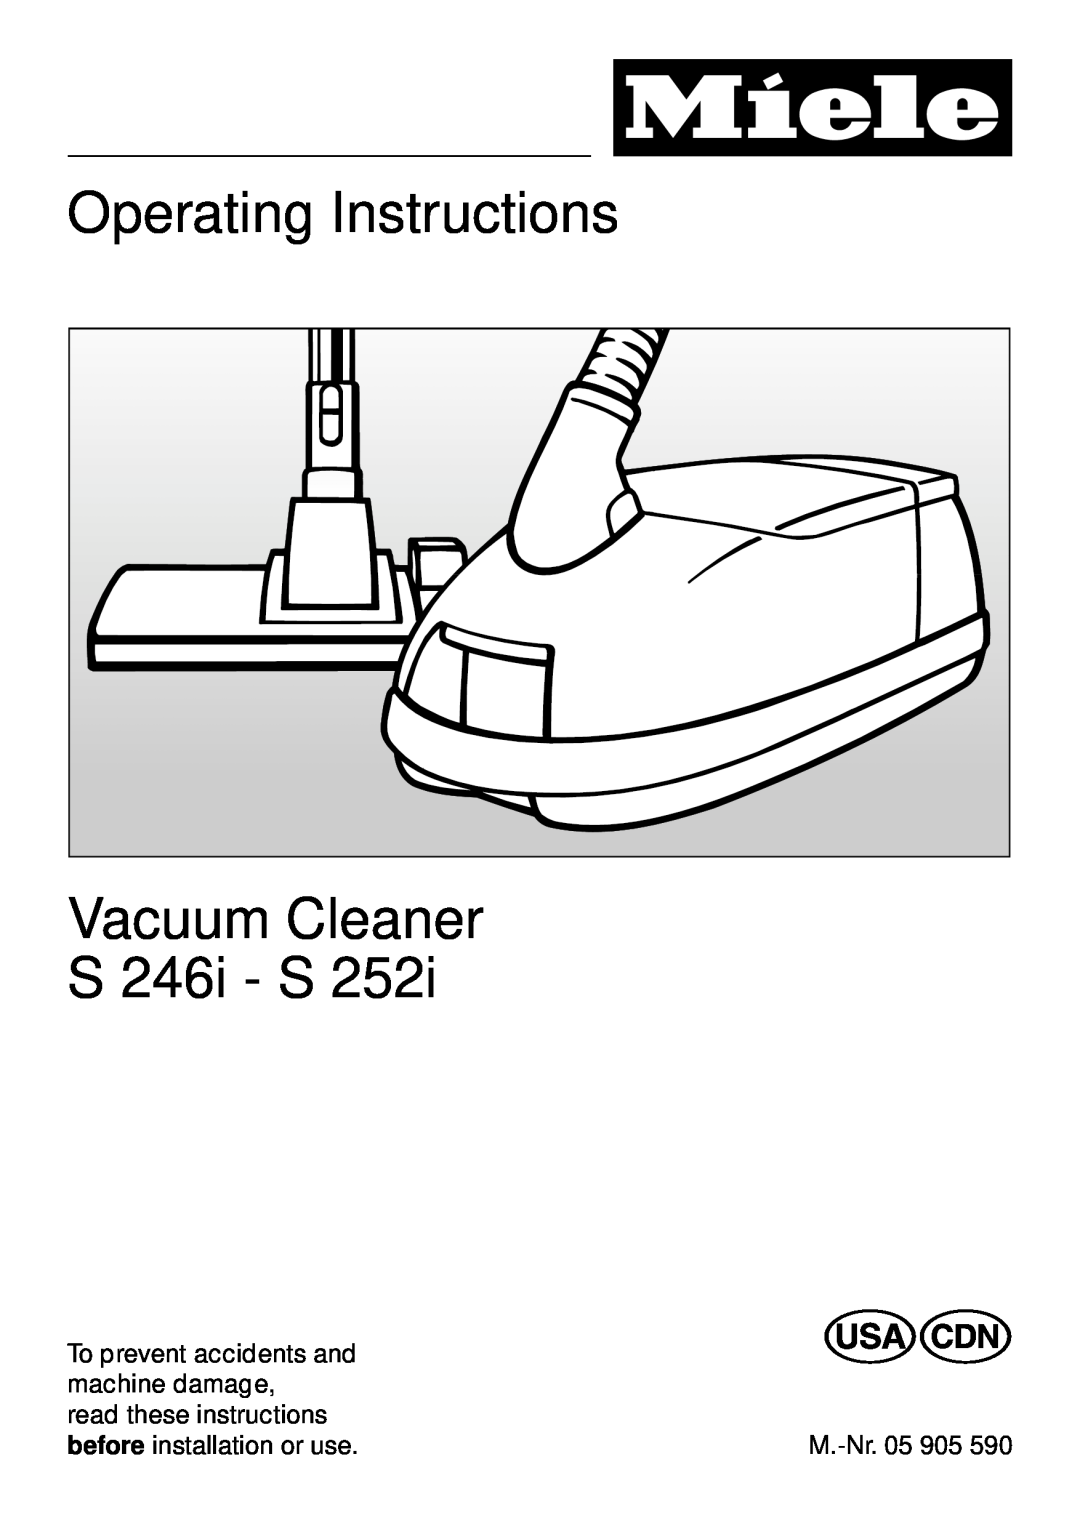 Miele S 252i manual Operating Instructions, S 246i - S, Vacuum Cleaner 